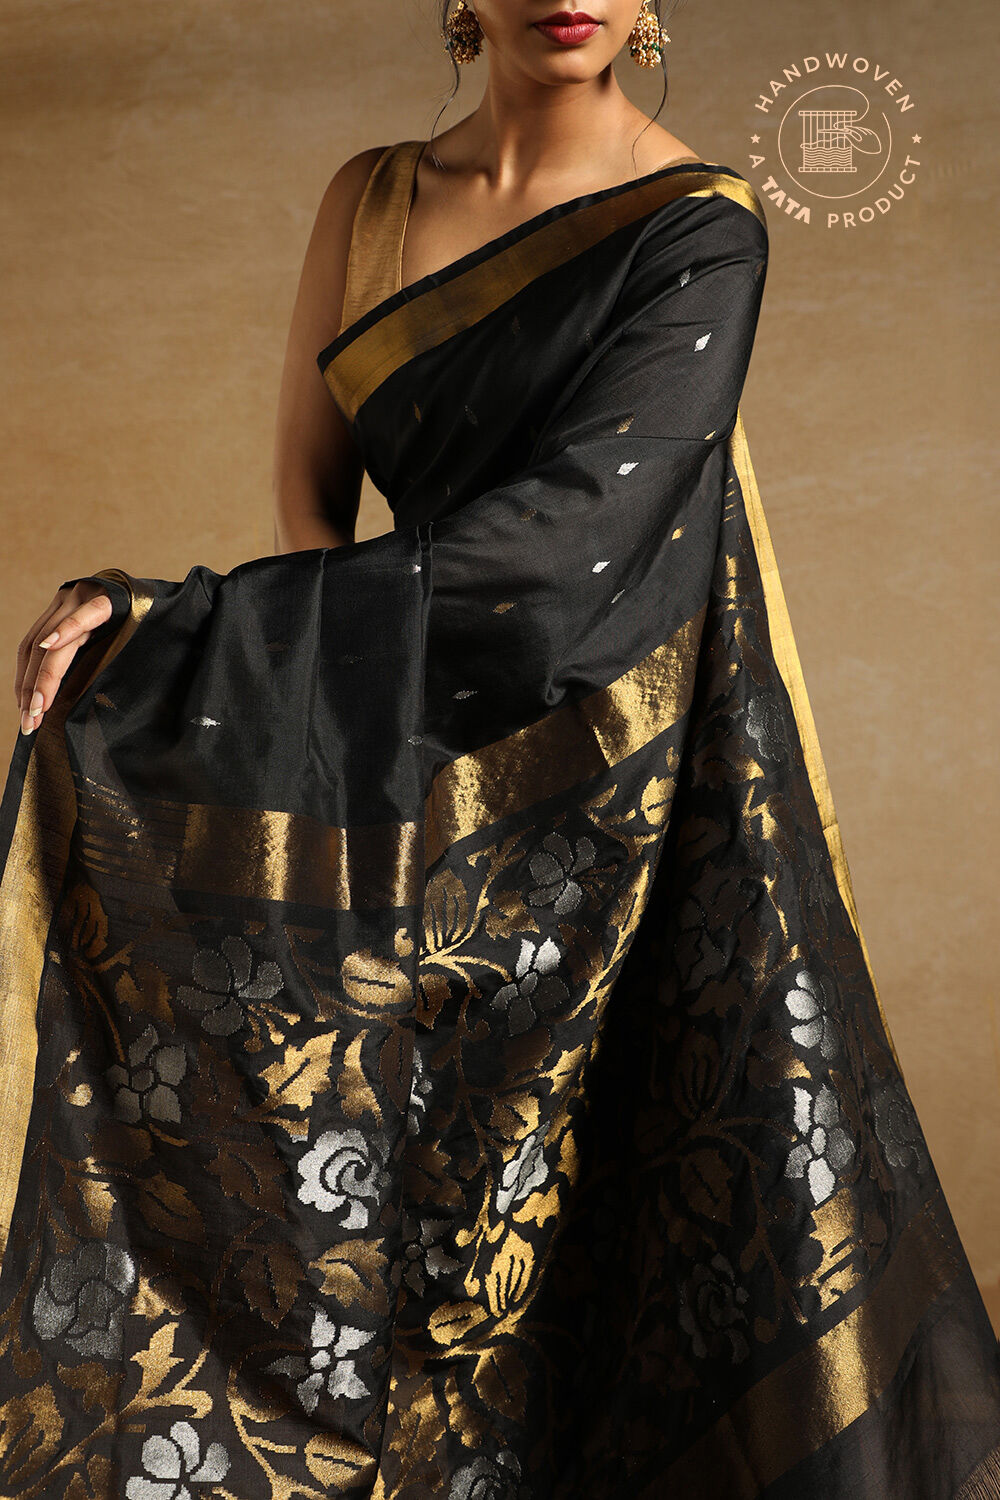 Taneira Festive Weaves Handcrafted Sarees From Across India Under One Roof  Ad - Advert Gallery